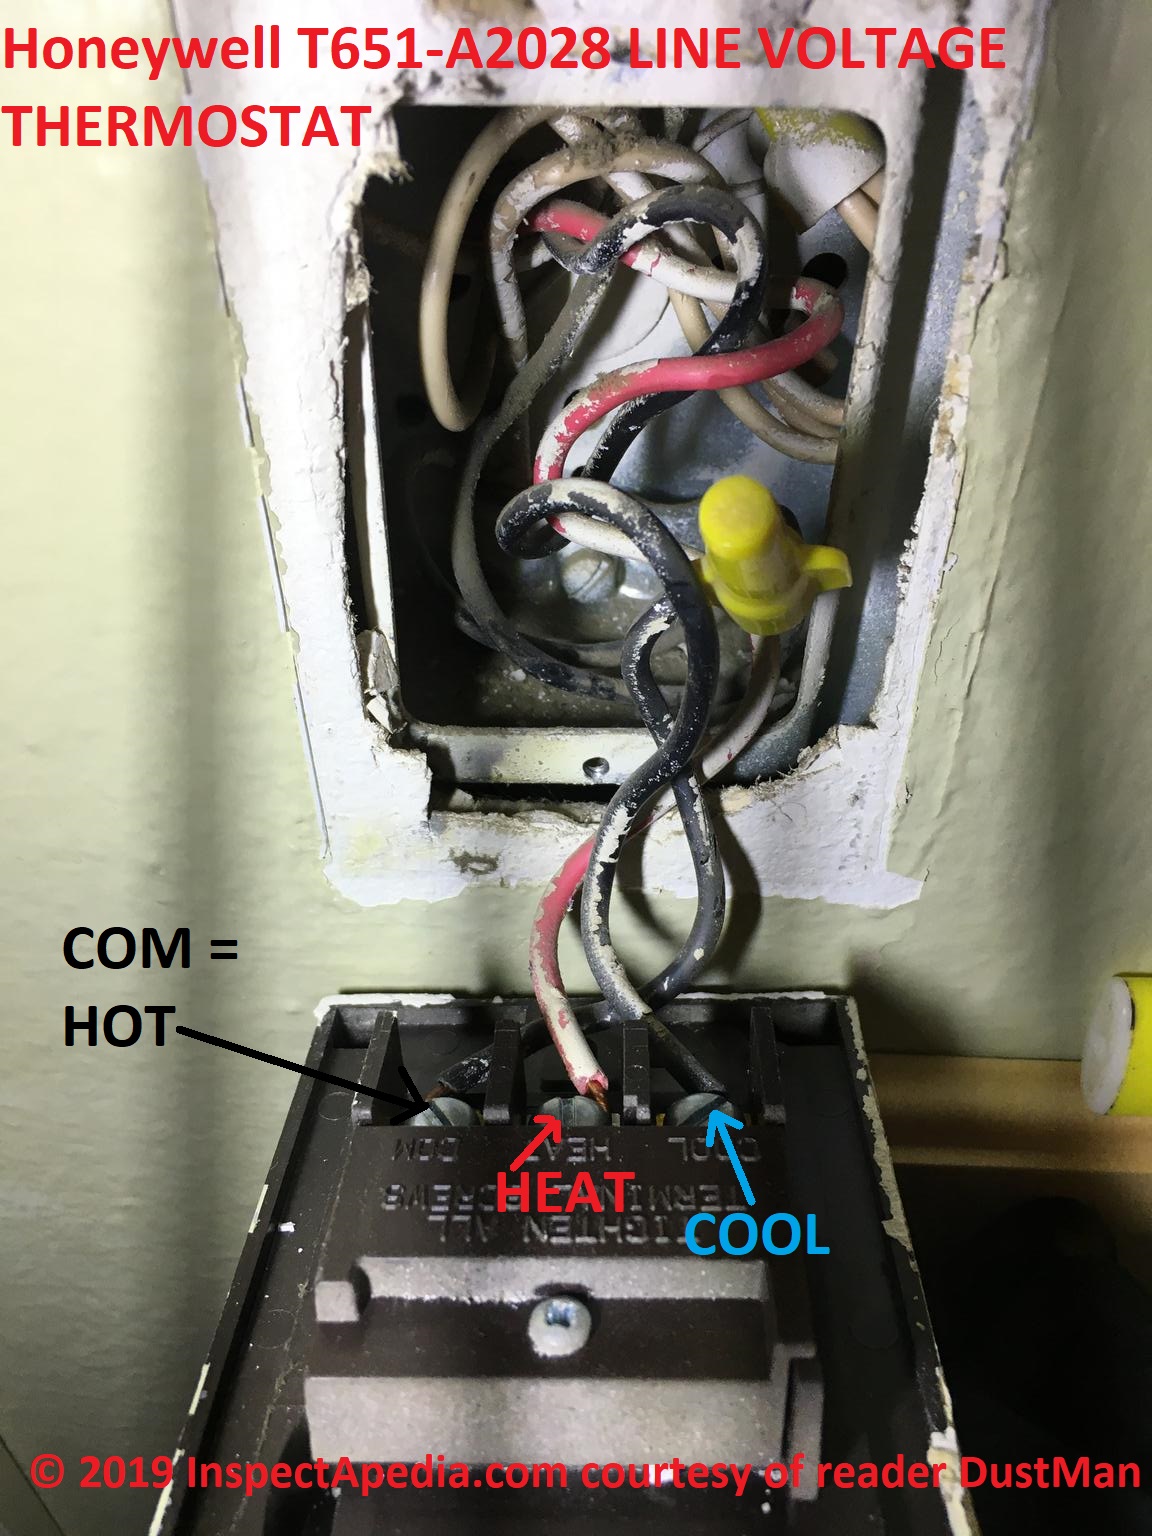 Honeywell Line Voltage Thermostat Wiring Diagram from inspectapedia.com